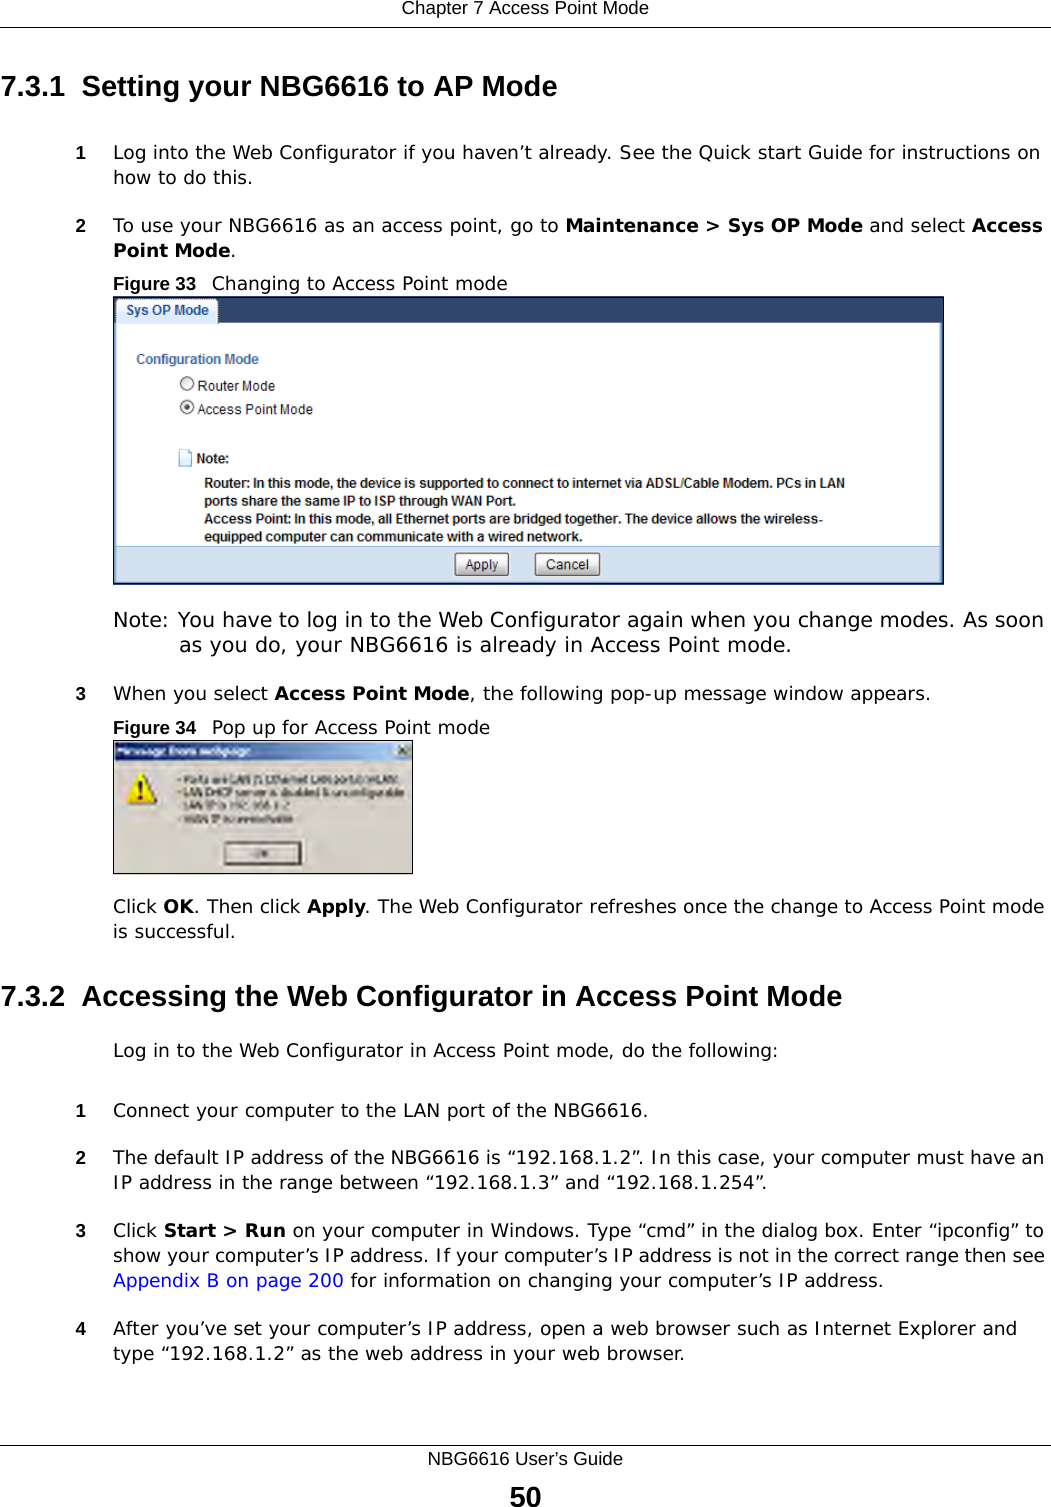 Chapter 7 Access Point ModeNBG6616 User’s Guide507.3.1  Setting your NBG6616 to AP Mode1Log into the Web Configurator if you haven’t already. See the Quick start Guide for instructions on how to do this.2To use your NBG6616 as an access point, go to Maintenance &gt; Sys OP Mode and select Access Point Mode. Figure 33   Changing to Access Point modeNote: You have to log in to the Web Configurator again when you change modes. As soon as you do, your NBG6616 is already in Access Point mode.3When you select Access Point Mode, the following pop-up message window appears.Figure 34   Pop up for Access Point mode Click OK. Then click Apply. The Web Configurator refreshes once the change to Access Point mode is successful.7.3.2  Accessing the Web Configurator in Access Point ModeLog in to the Web Configurator in Access Point mode, do the following:1Connect your computer to the LAN port of the NBG6616. 2The default IP address of the NBG6616 is “192.168.1.2”. In this case, your computer must have an IP address in the range between “192.168.1.3” and “192.168.1.254”.3Click Start &gt; Run on your computer in Windows. Type “cmd” in the dialog box. Enter “ipconfig” to show your computer’s IP address. If your computer’s IP address is not in the correct range then see Appendix B on page 200 for information on changing your computer’s IP address.4After you’ve set your computer’s IP address, open a web browser such as Internet Explorer and type “192.168.1.2” as the web address in your web browser.